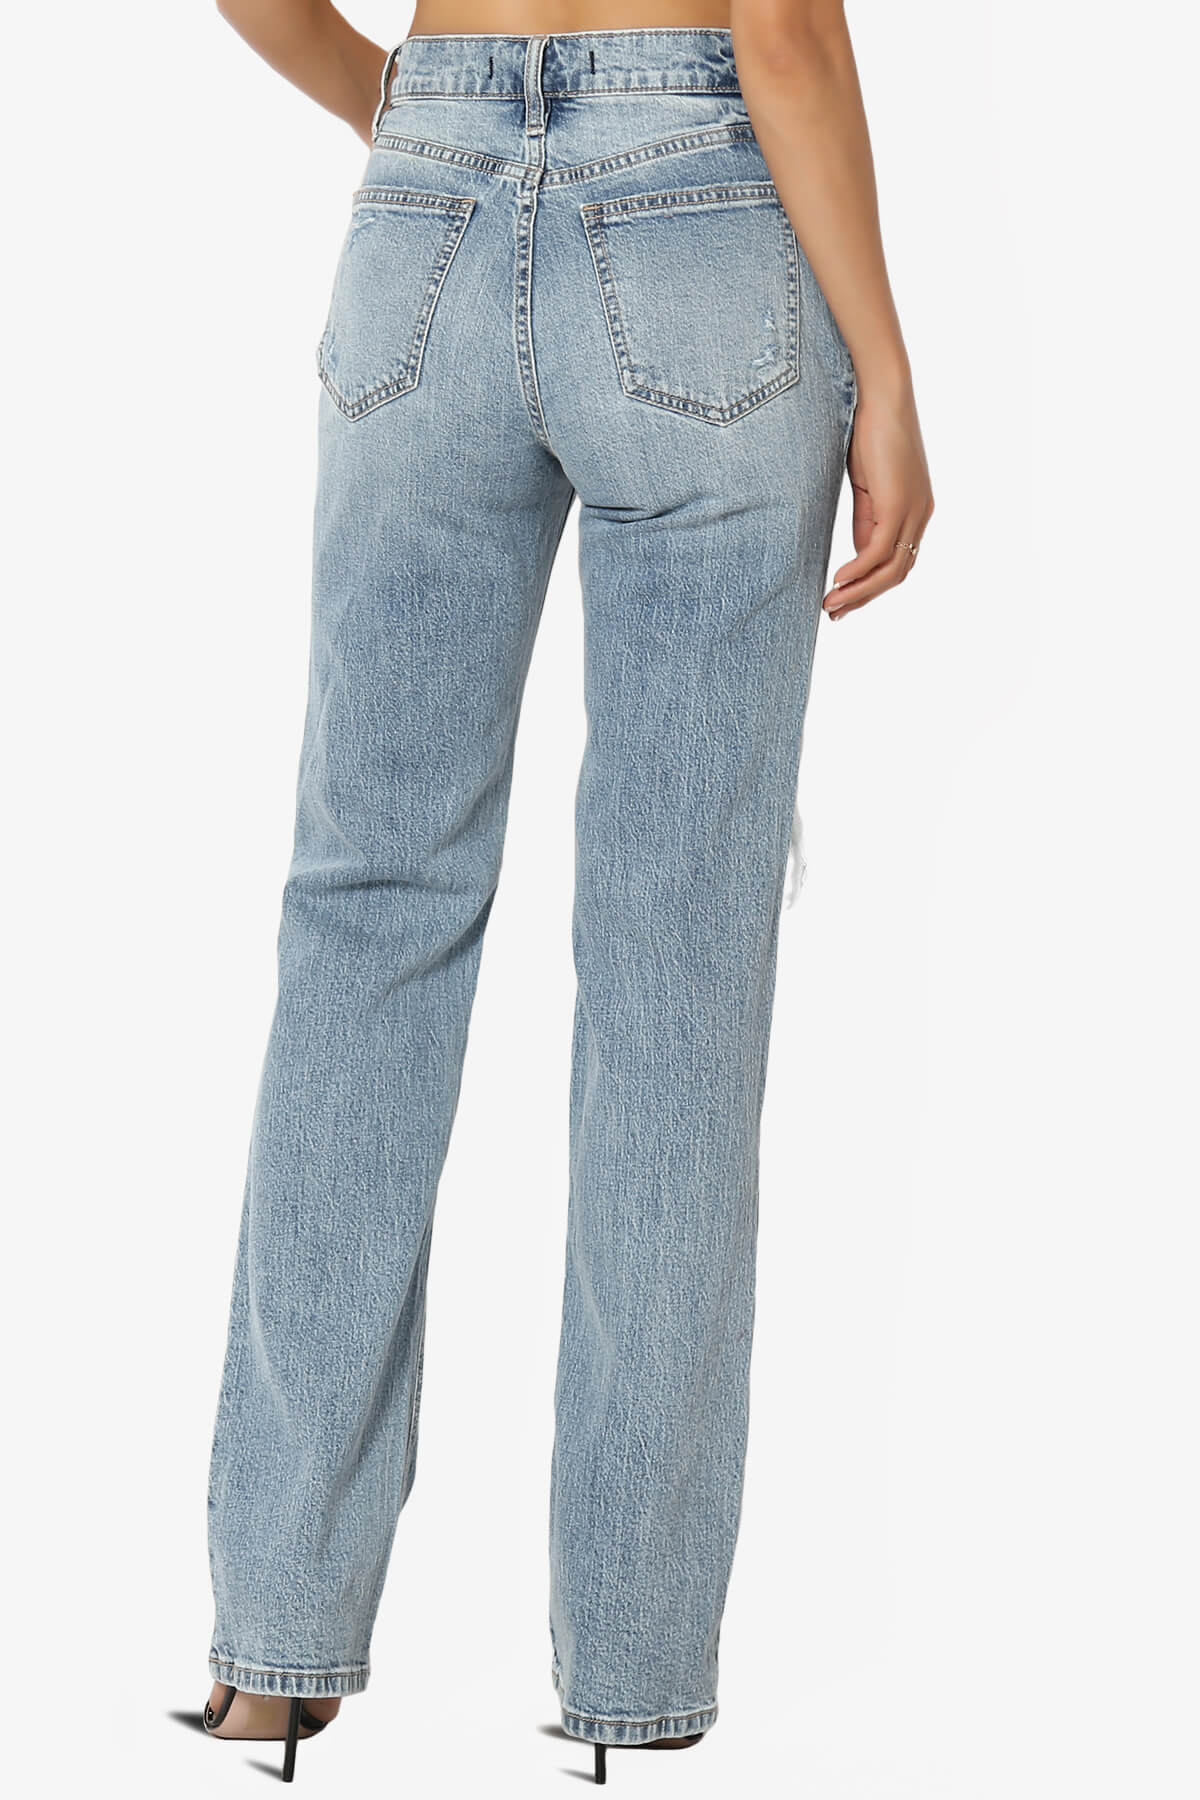 Load image into Gallery viewer, Codi High Rise Dad Jeans in Distressed Med MEDIUM_2
